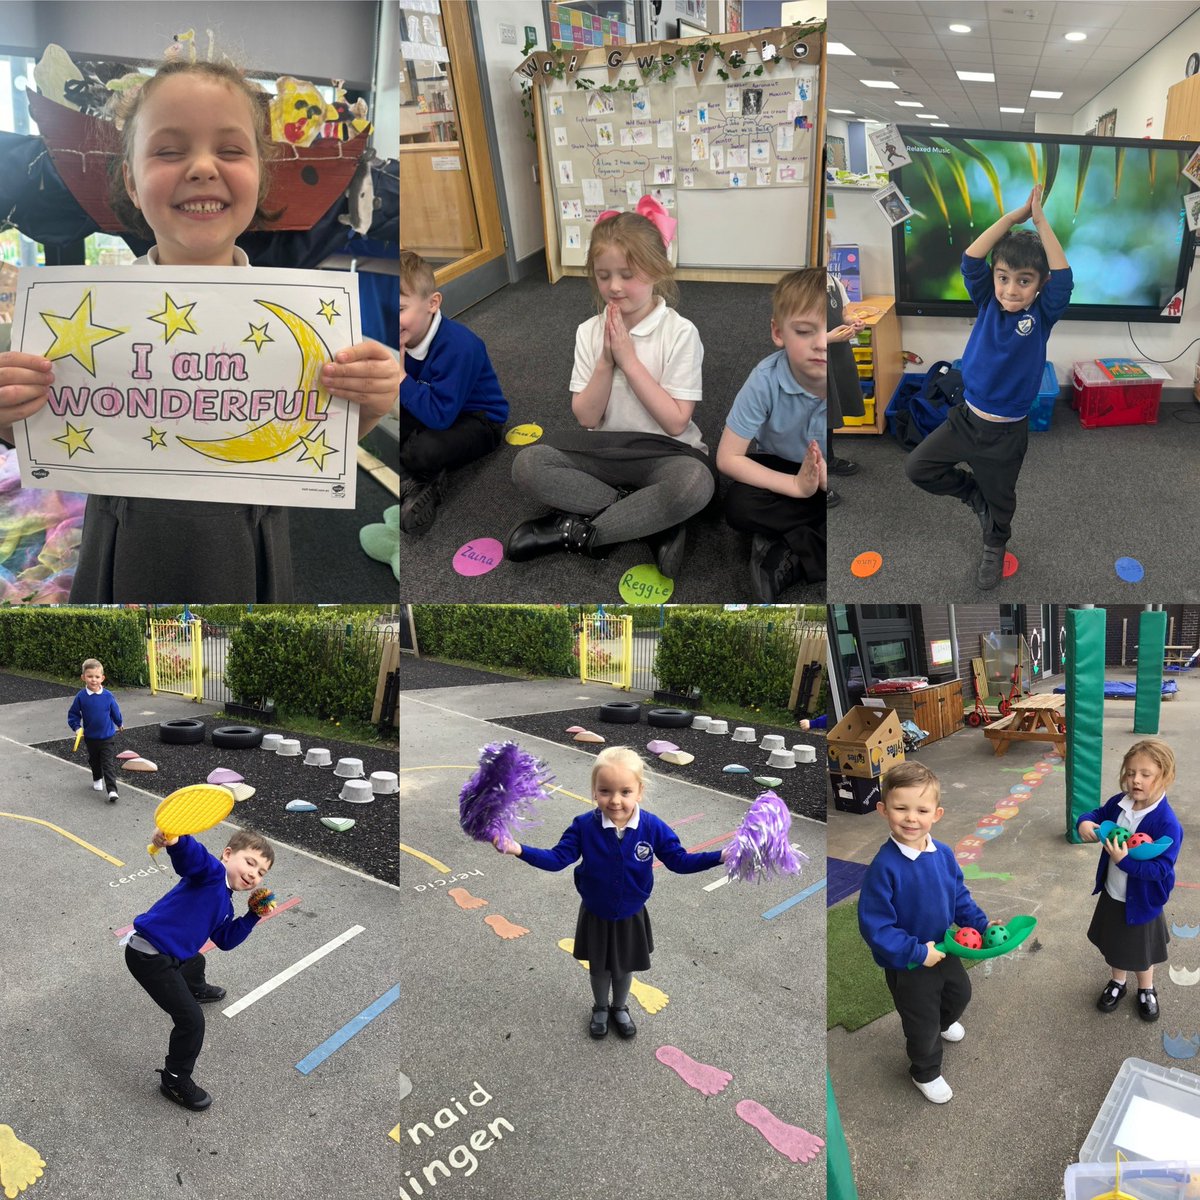 We have ended a fantastic week in Dosbarth Glas by reflecting on our qualities, meditating, yoga and using our wellbeing box in the sunshine! ☀️🧘🏻‍♀️🍃 #teamgwenfro #healthyconfidentindividuals #bekindtoyourmind